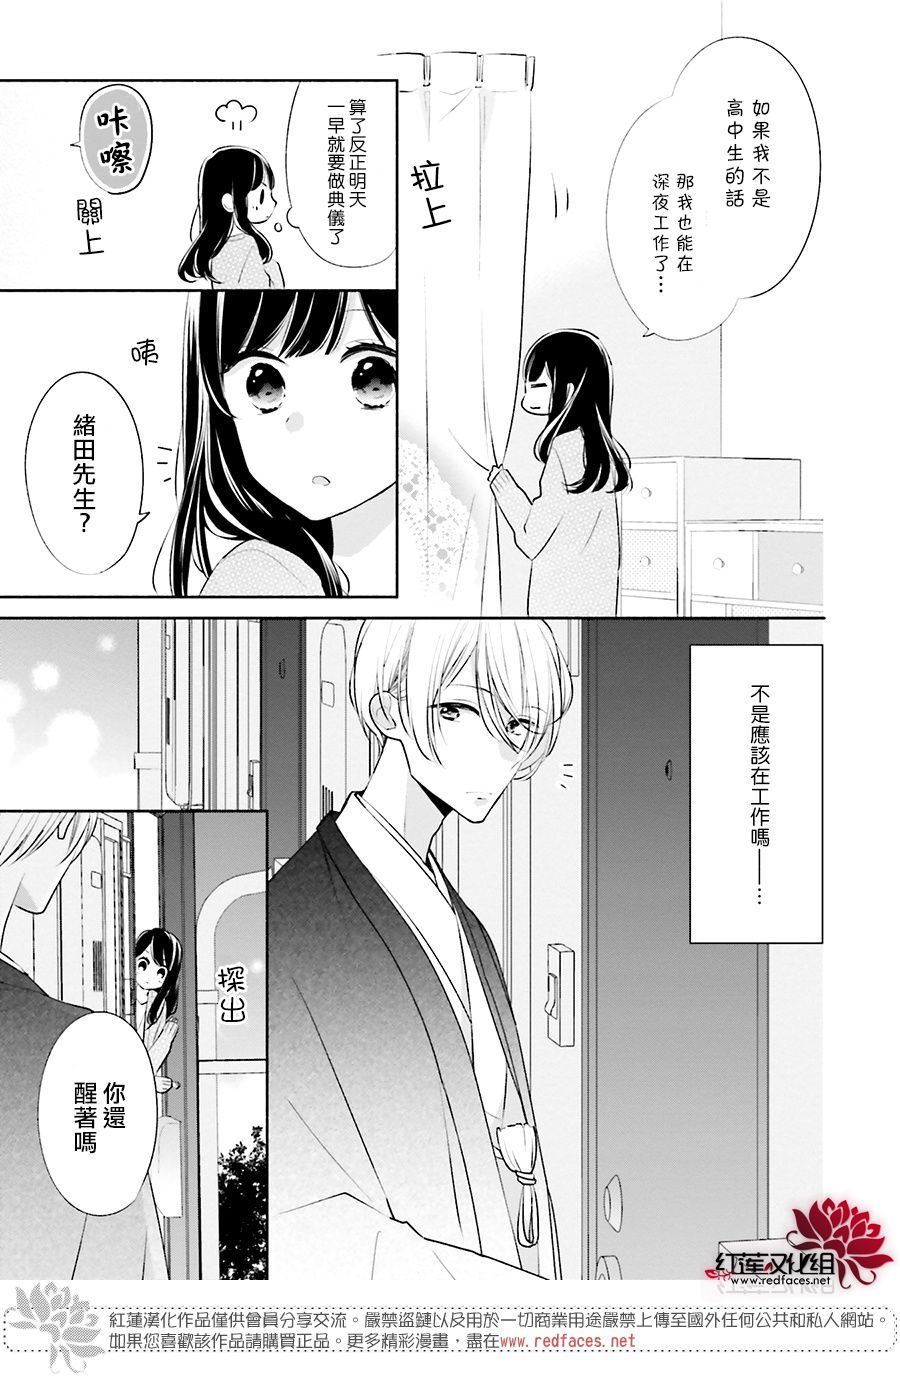 If given a second chance - 27話 - 5